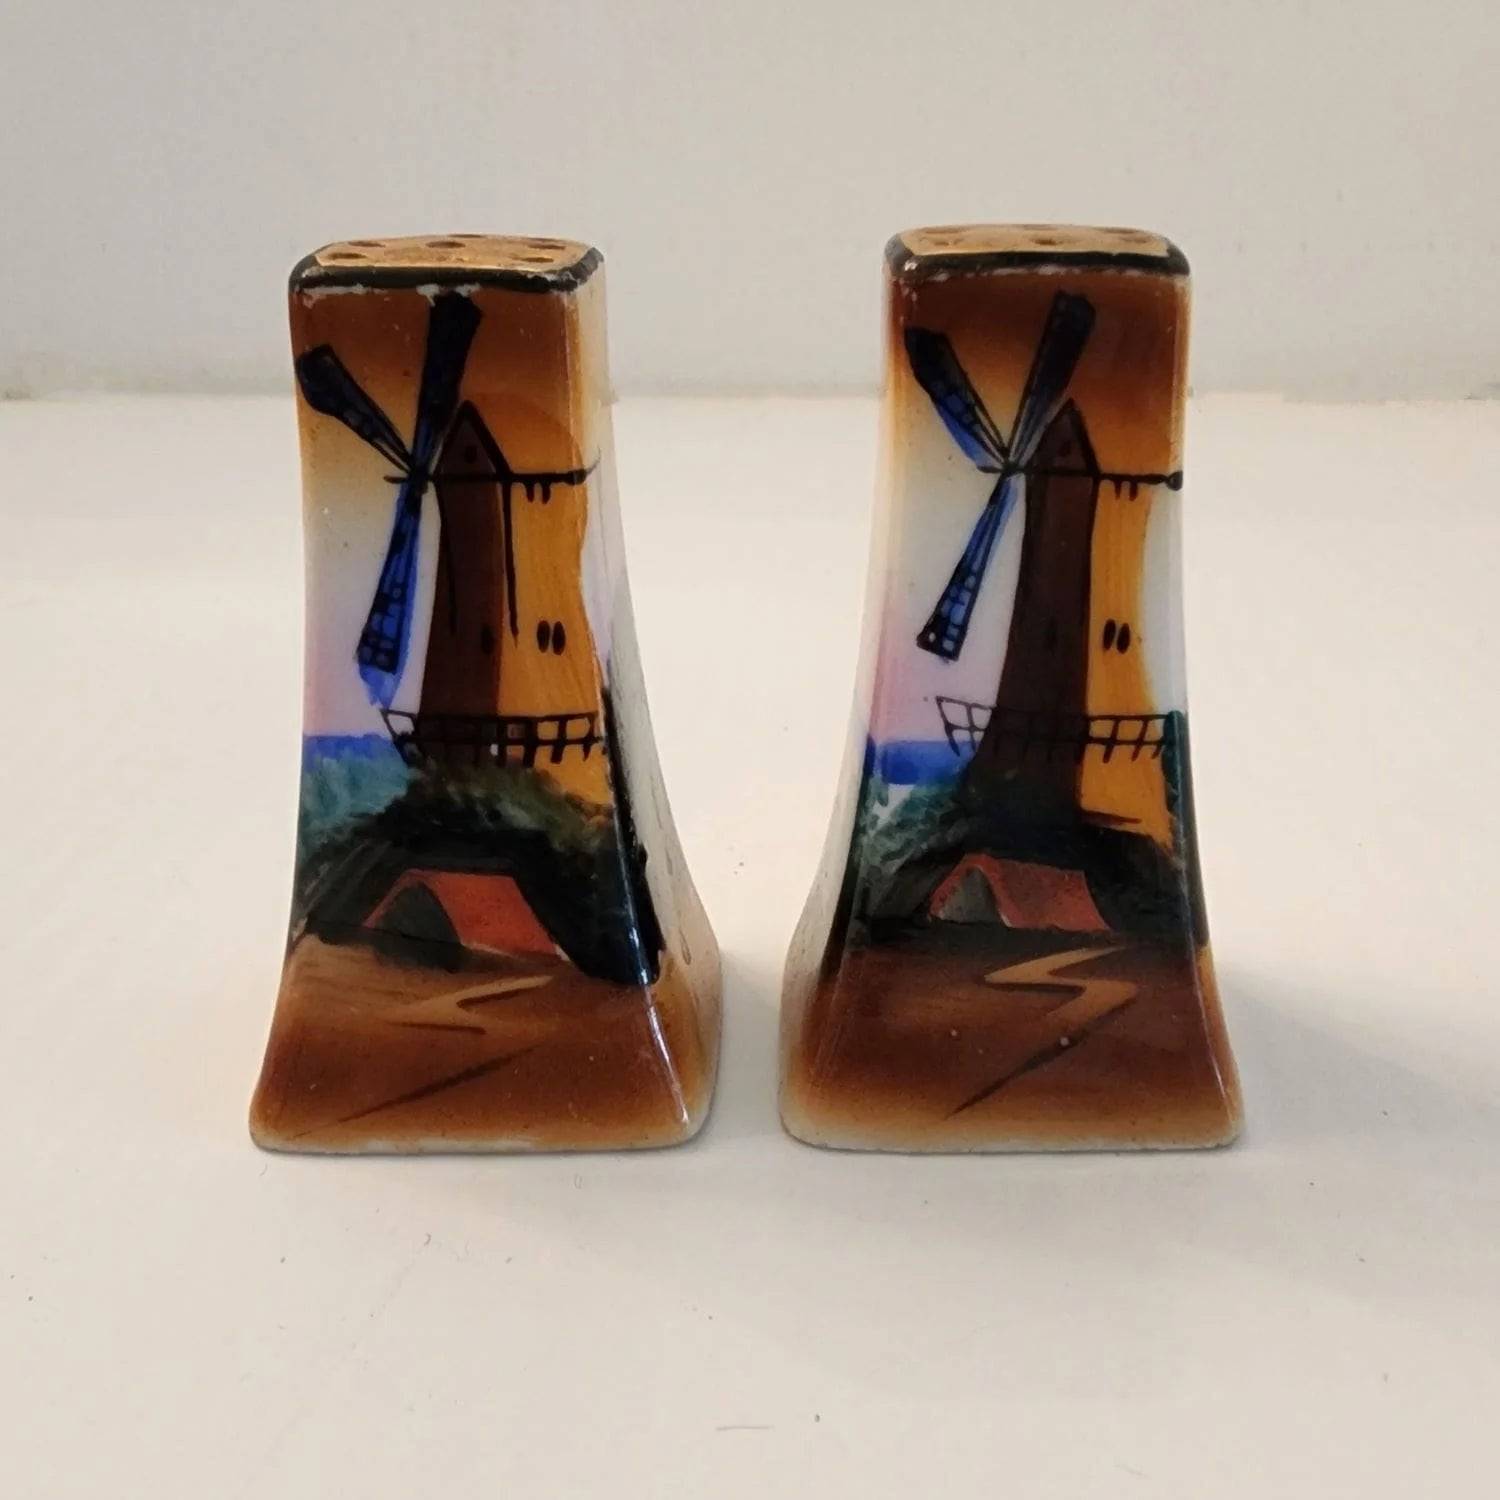 Two small salt and pepper shakers featuring a windmill design. Perfect for adding flavor to your meals.